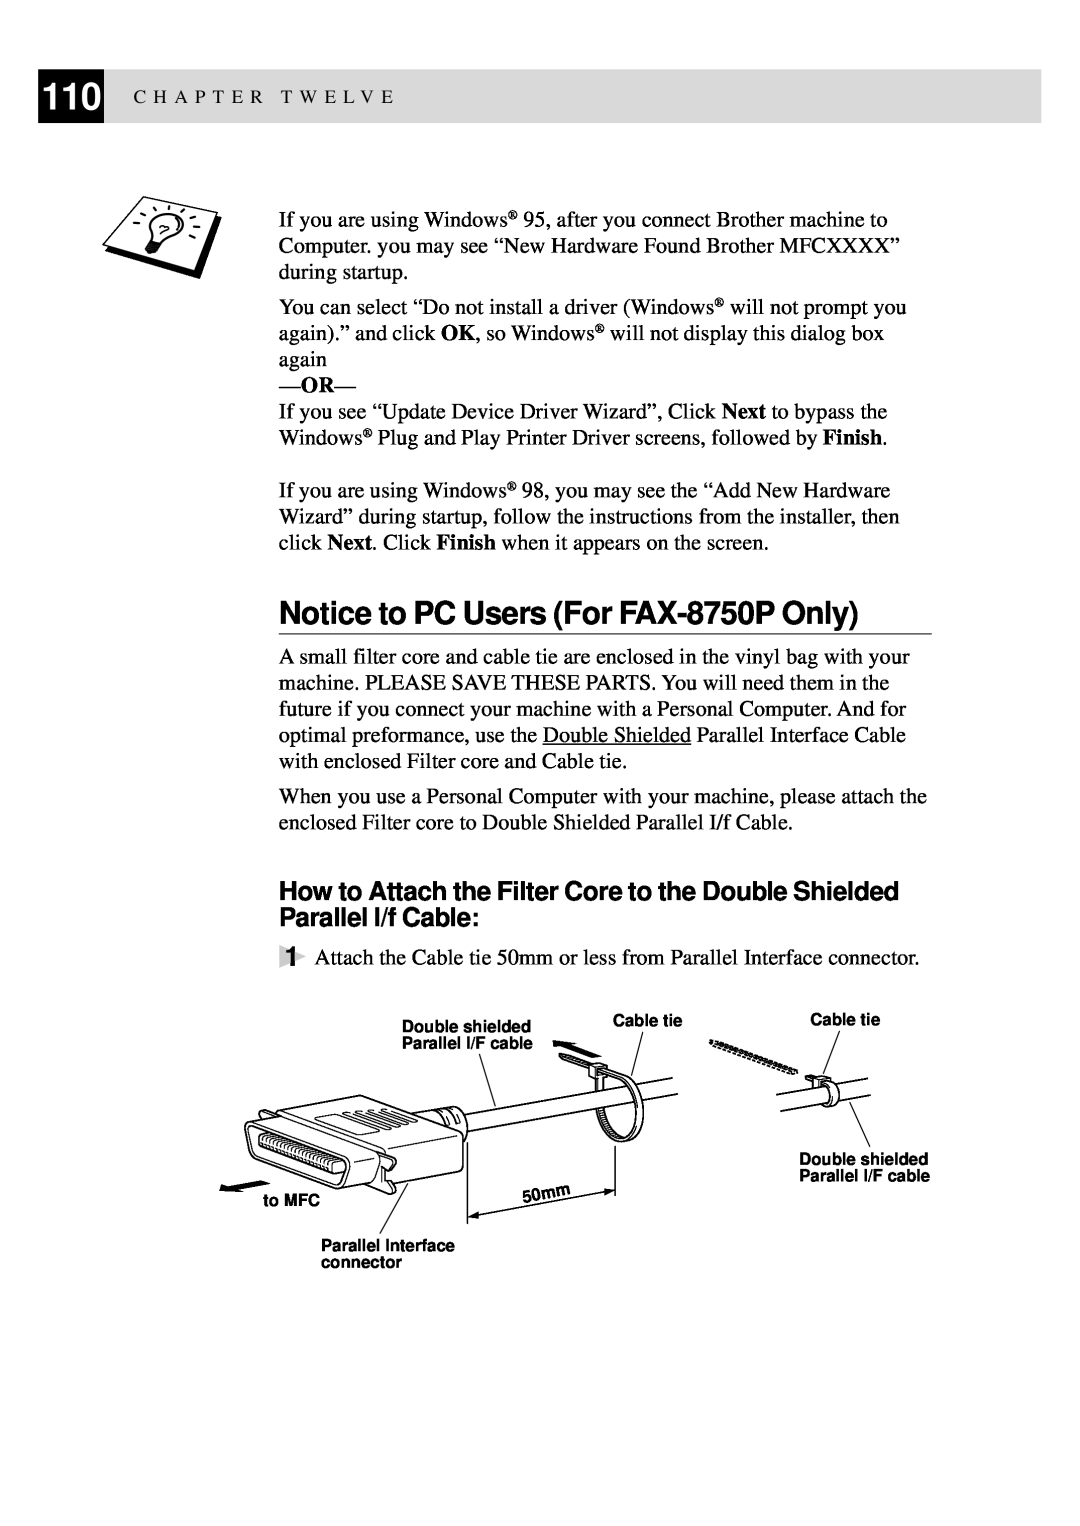 Brother FAX-8350P, MFC-9650 owner manual Notice to PC Users For FAX-8750P Only, C H A P T E R T W E L V E 